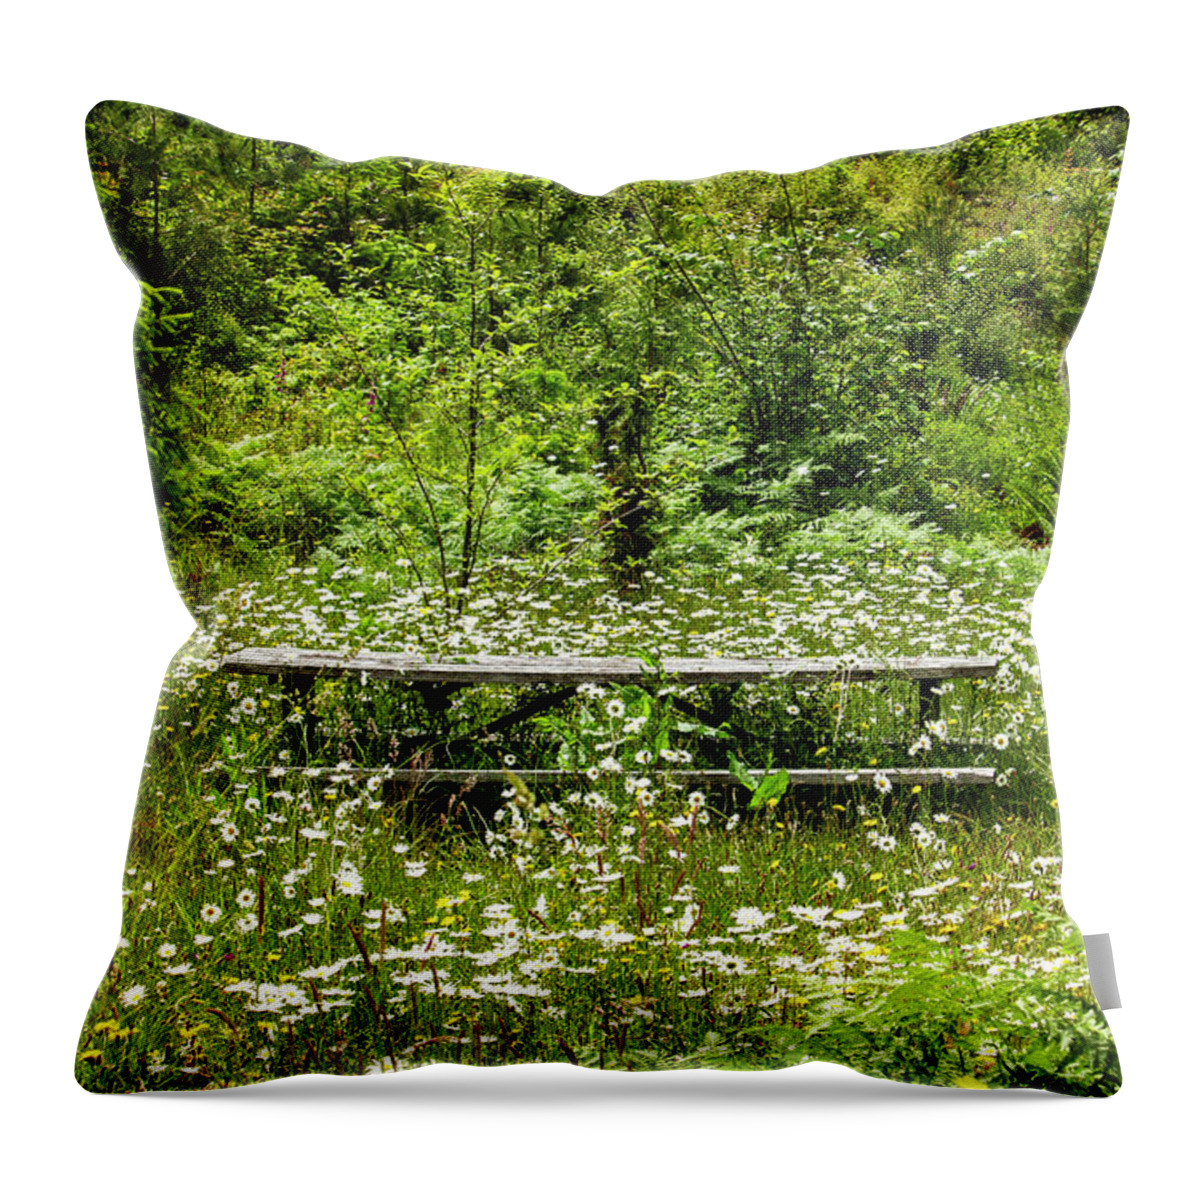 Daisys Throw Pillow featuring the photograph Meadow Picnic by Cheryl Day